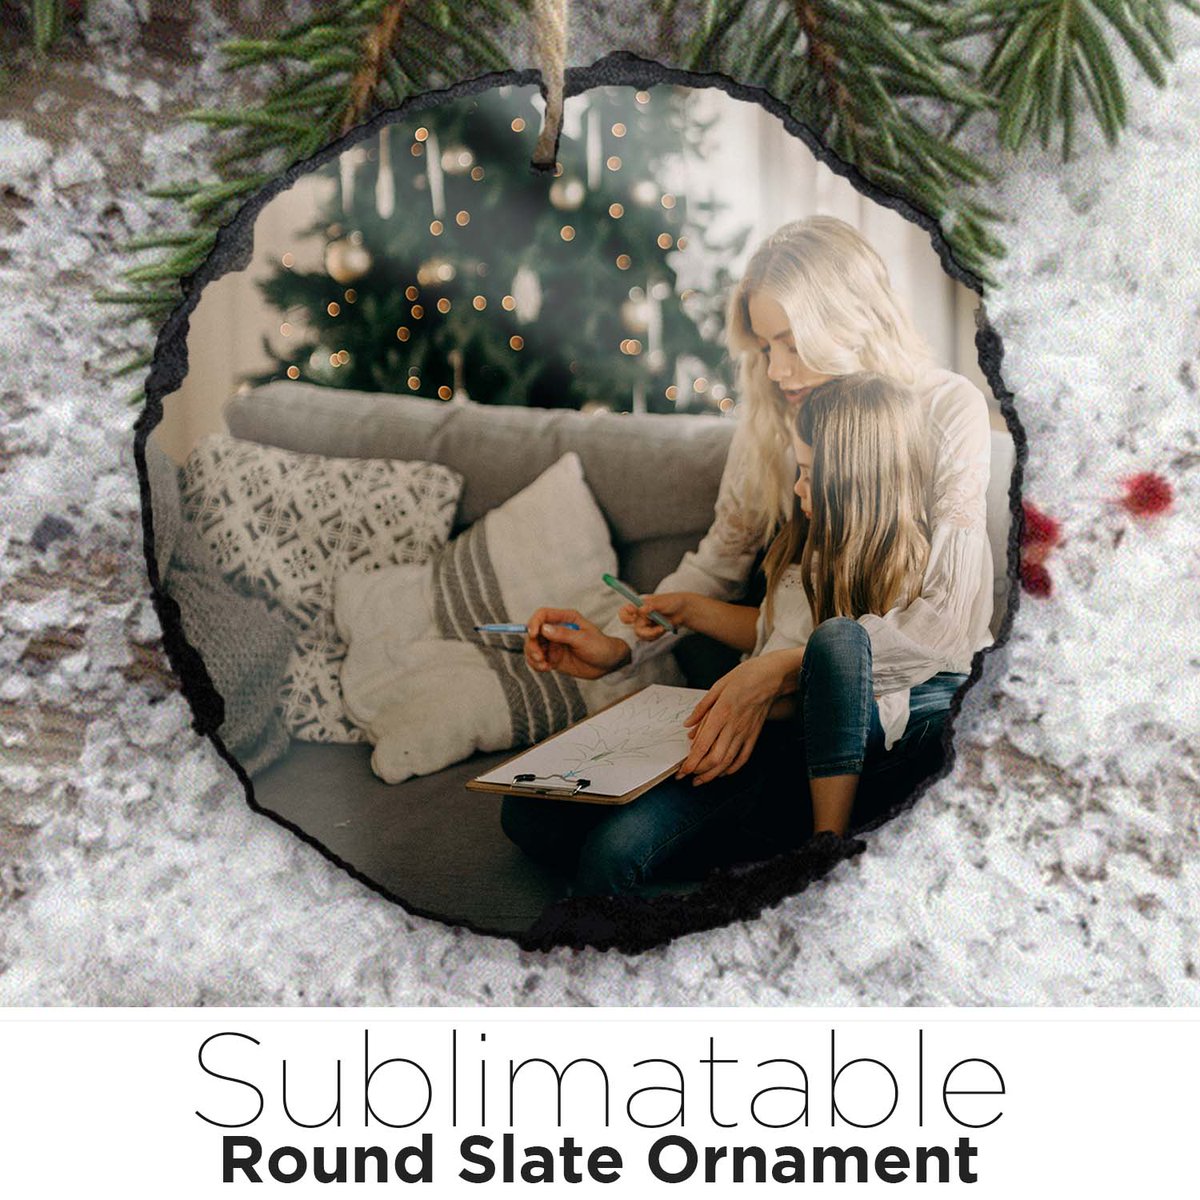 With Christmas around the corner, these #sublimation Slate #Ornament are perfect for decorating your tree this year!
.
.
.
#GiftIdea #Christmas #SublimationOrnament #TreeDecoration #PersonalizeGift